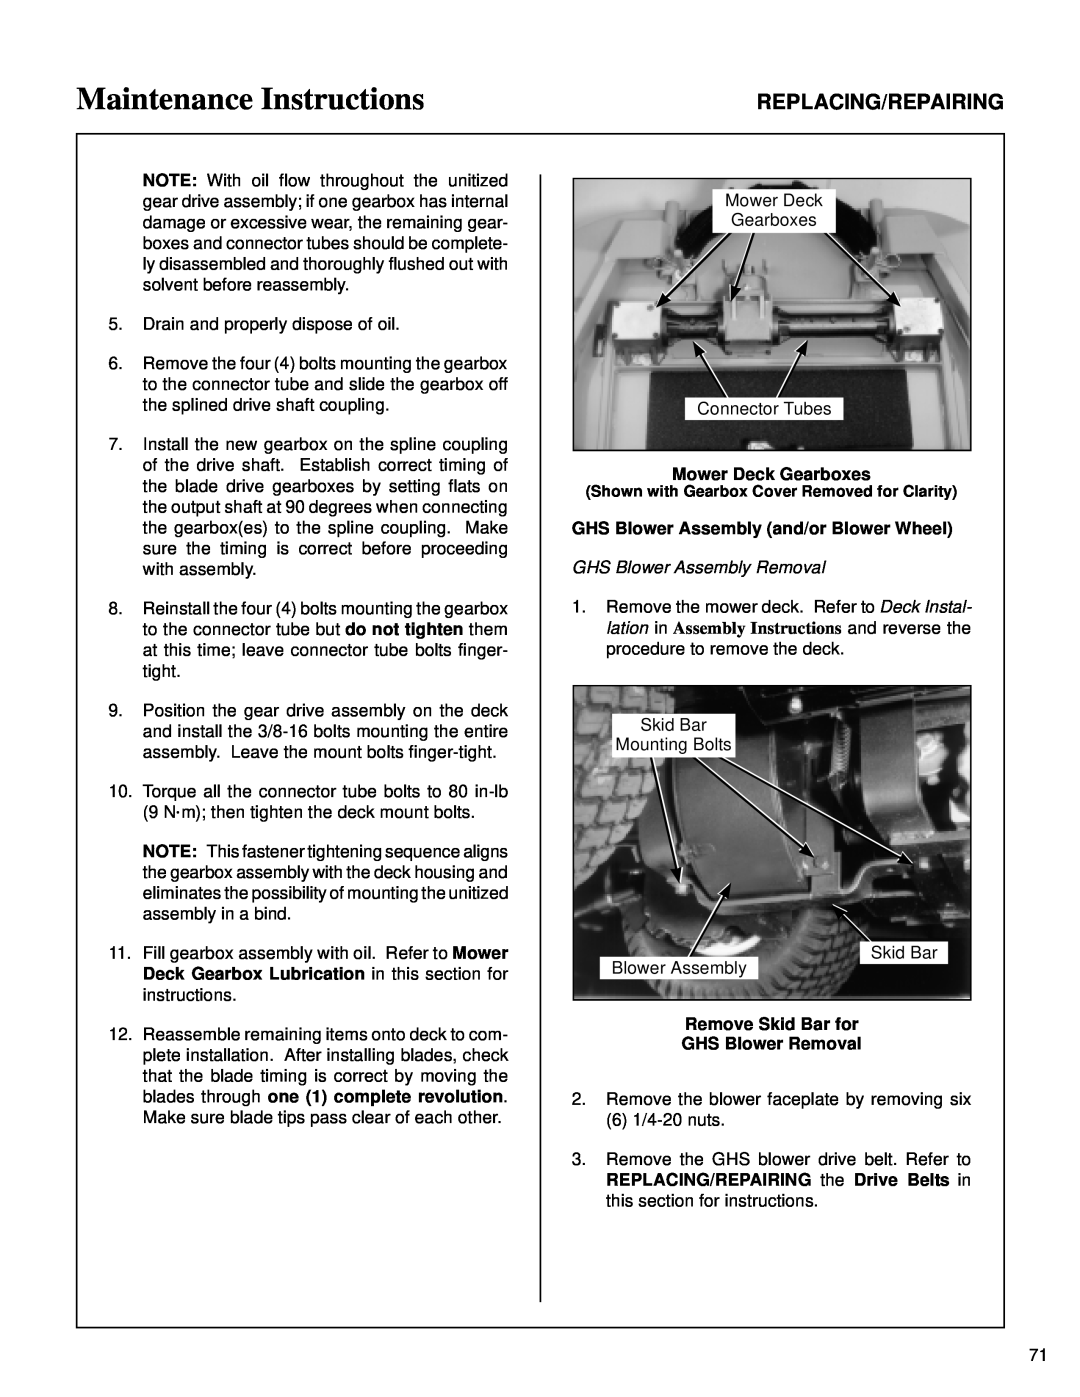 Walker MT Maintenance Instructions, Replacing/Repairing, Mower Deck Gearboxes, GHS Blower Assembly and/or Blower Wheel 